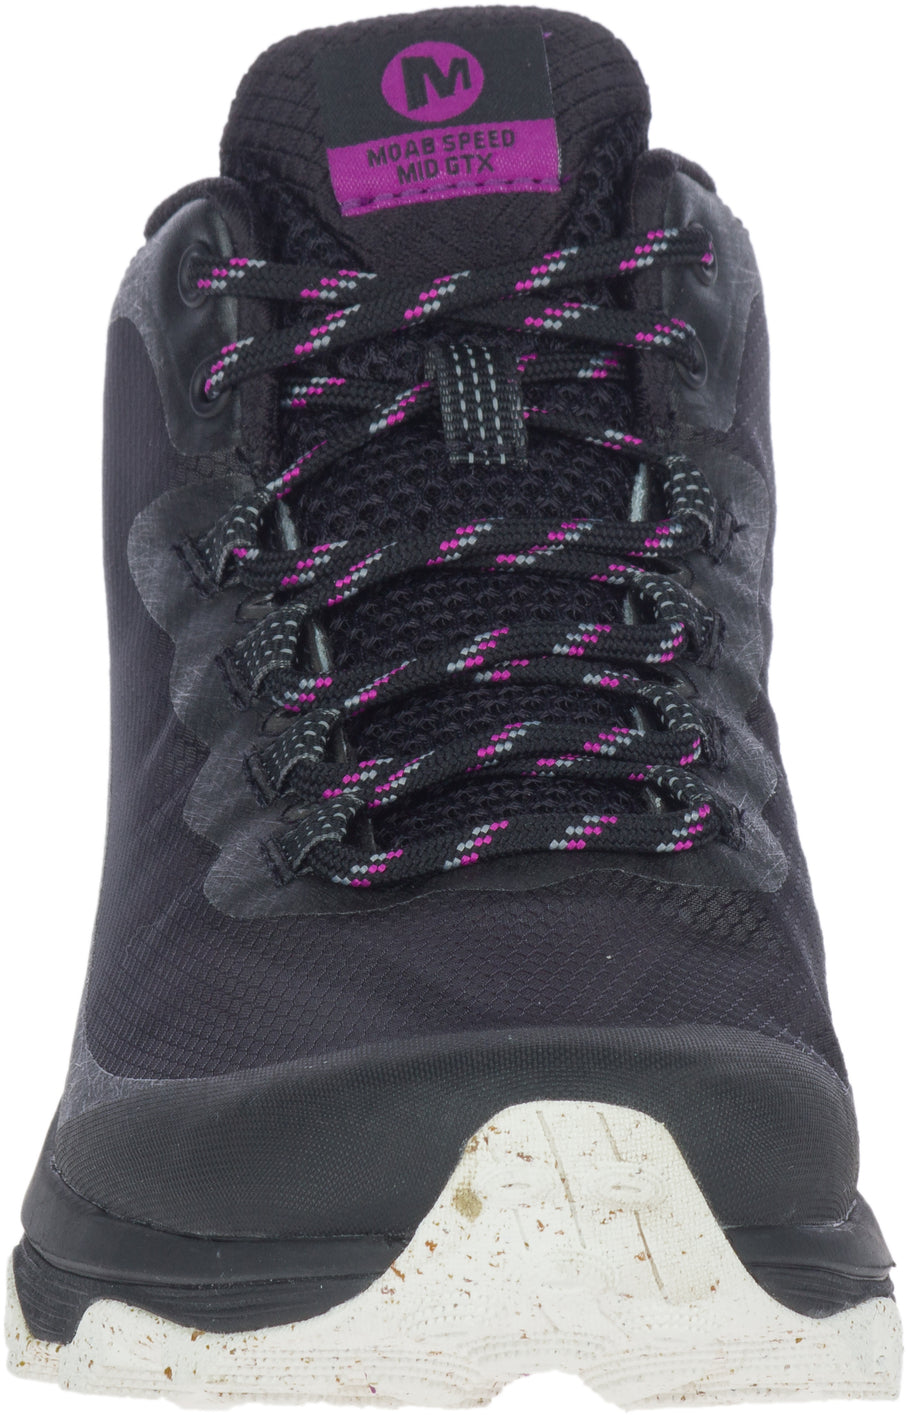 Chaussures pour femme Moab Speed Mid Goretex